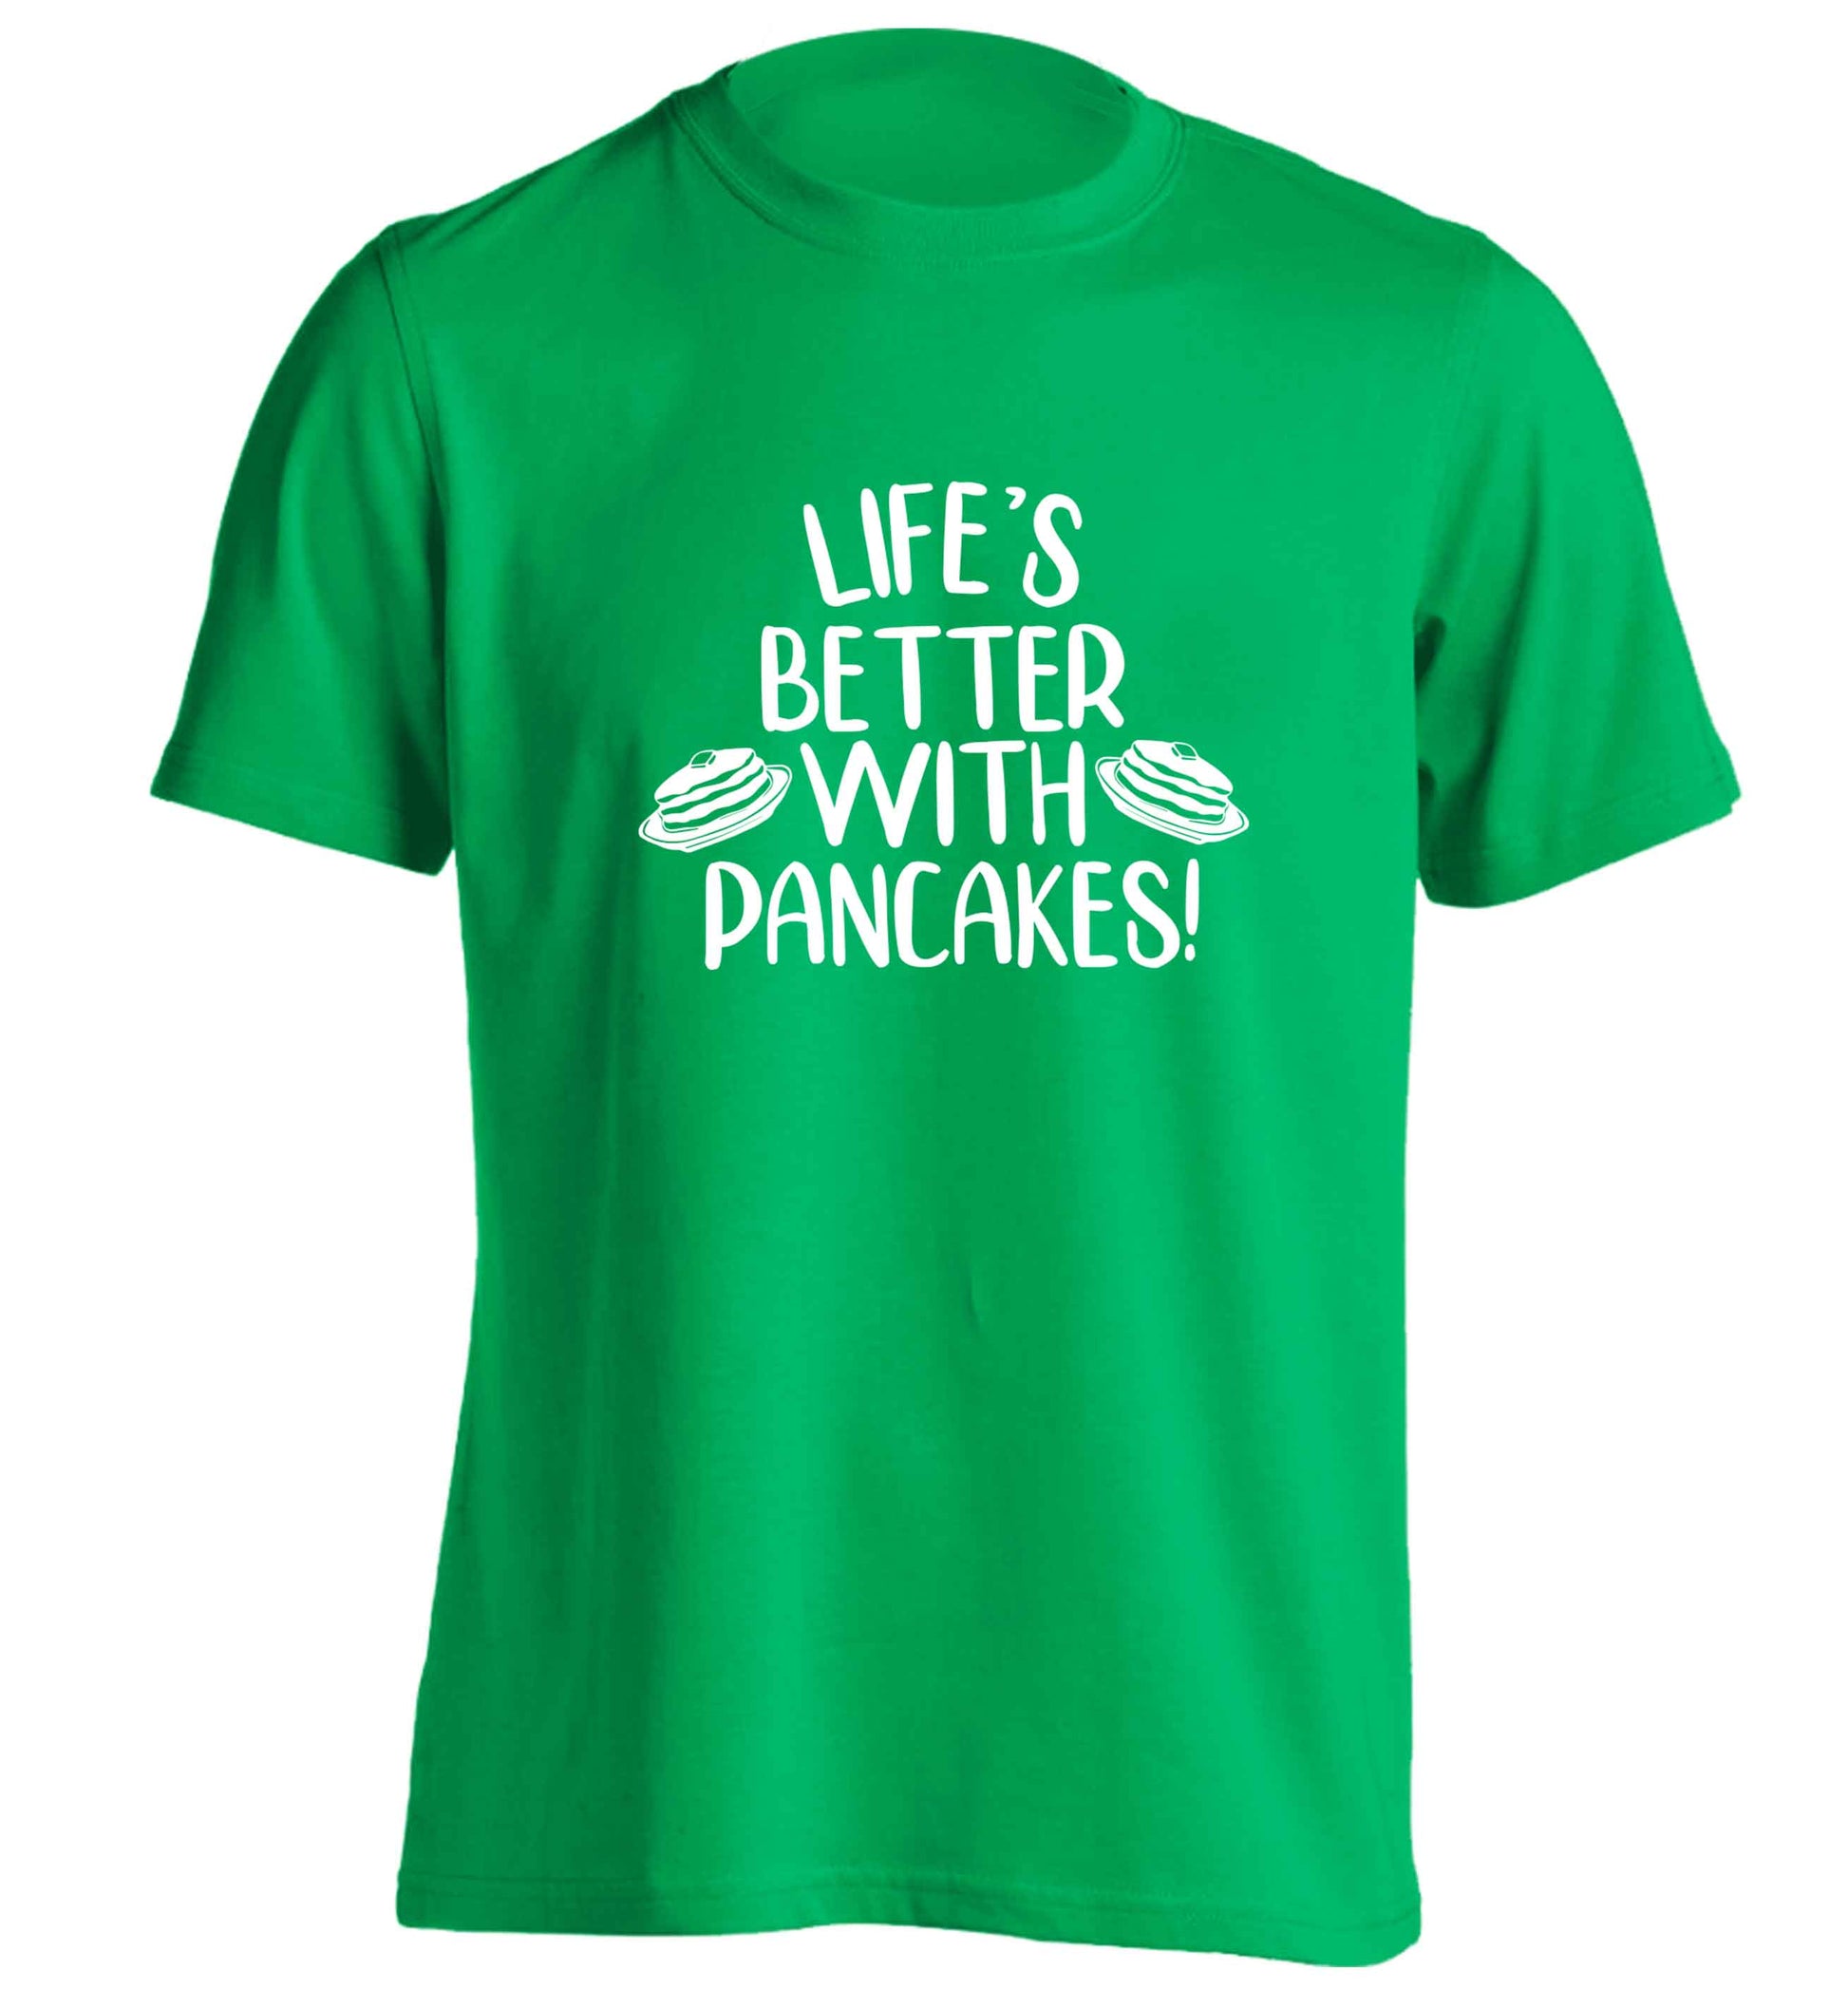 Life's better with pancakes adults unisex green Tshirt 2XL